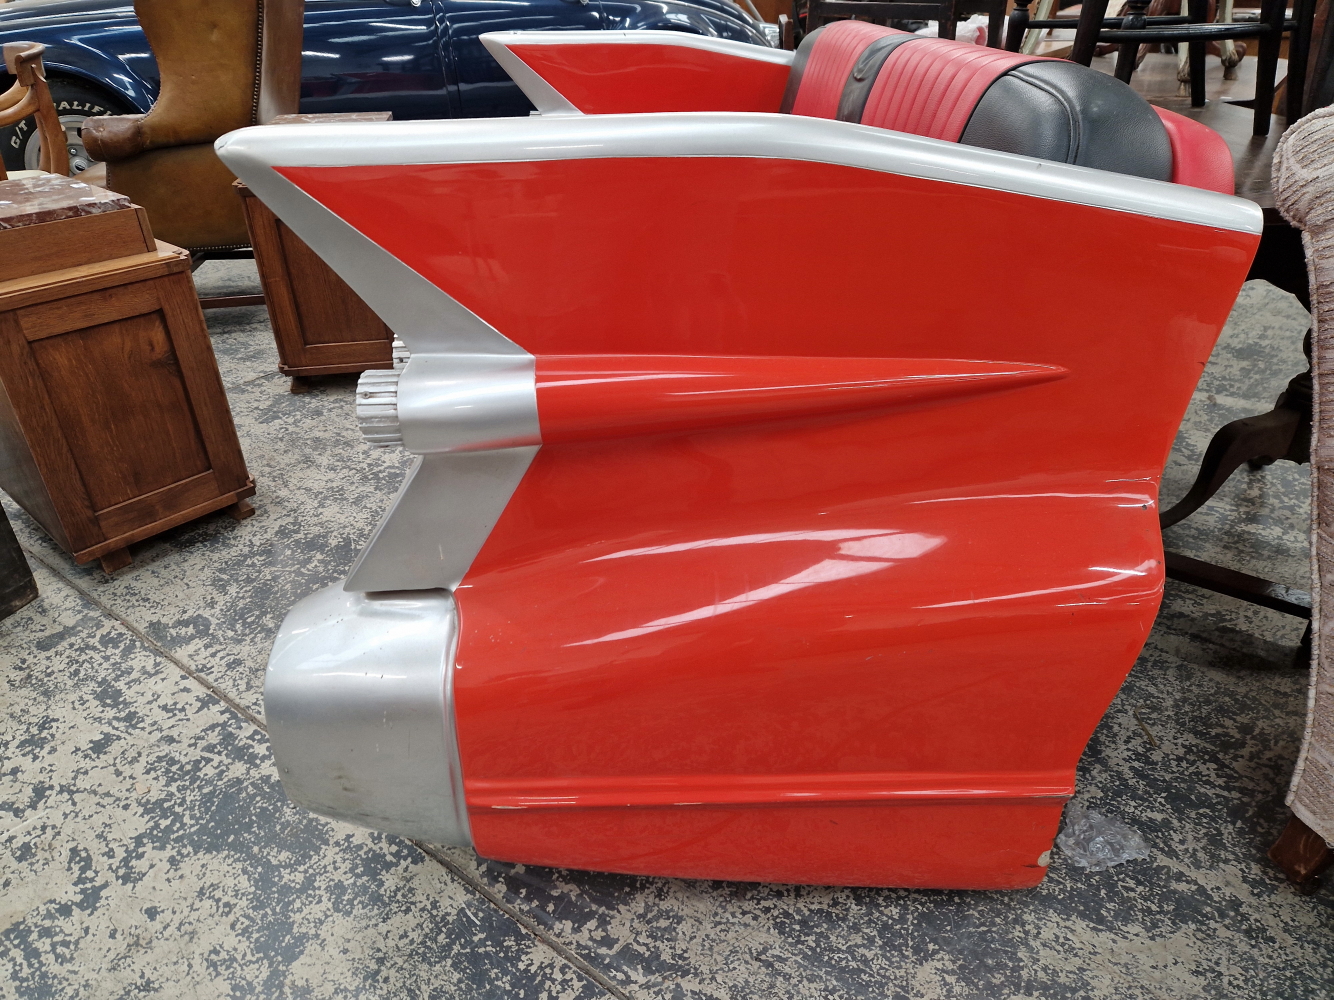 A MID CENTURY STYLE DINER SEAT FORMED AS THE TAIL END OF A CADILLAC - Image 3 of 4